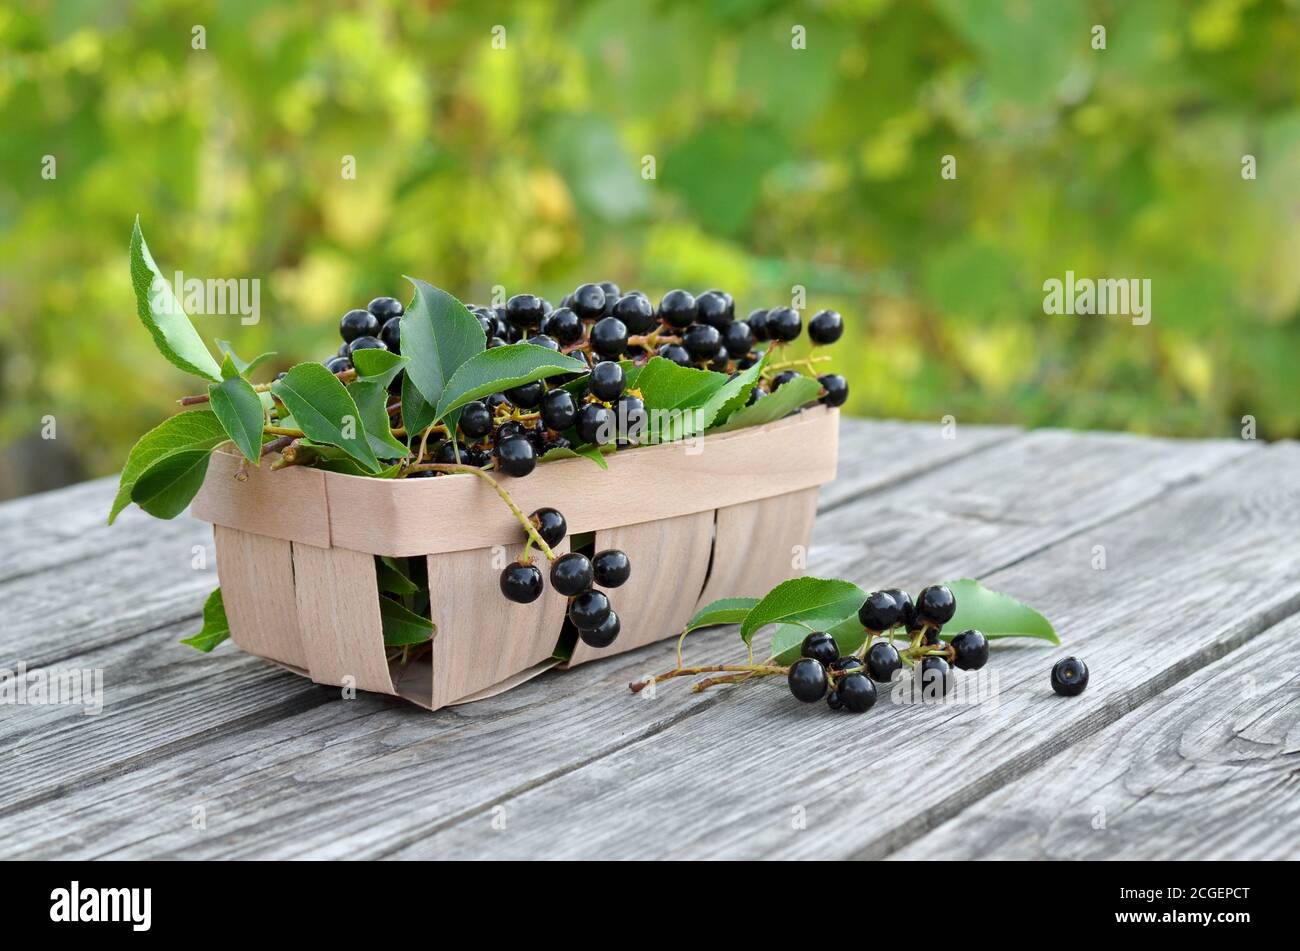 Prunus serotina. Black ripe bird cherry berries in a basket on an old wooden table close-up. Shallow depth of field, selective focus Stock Photo